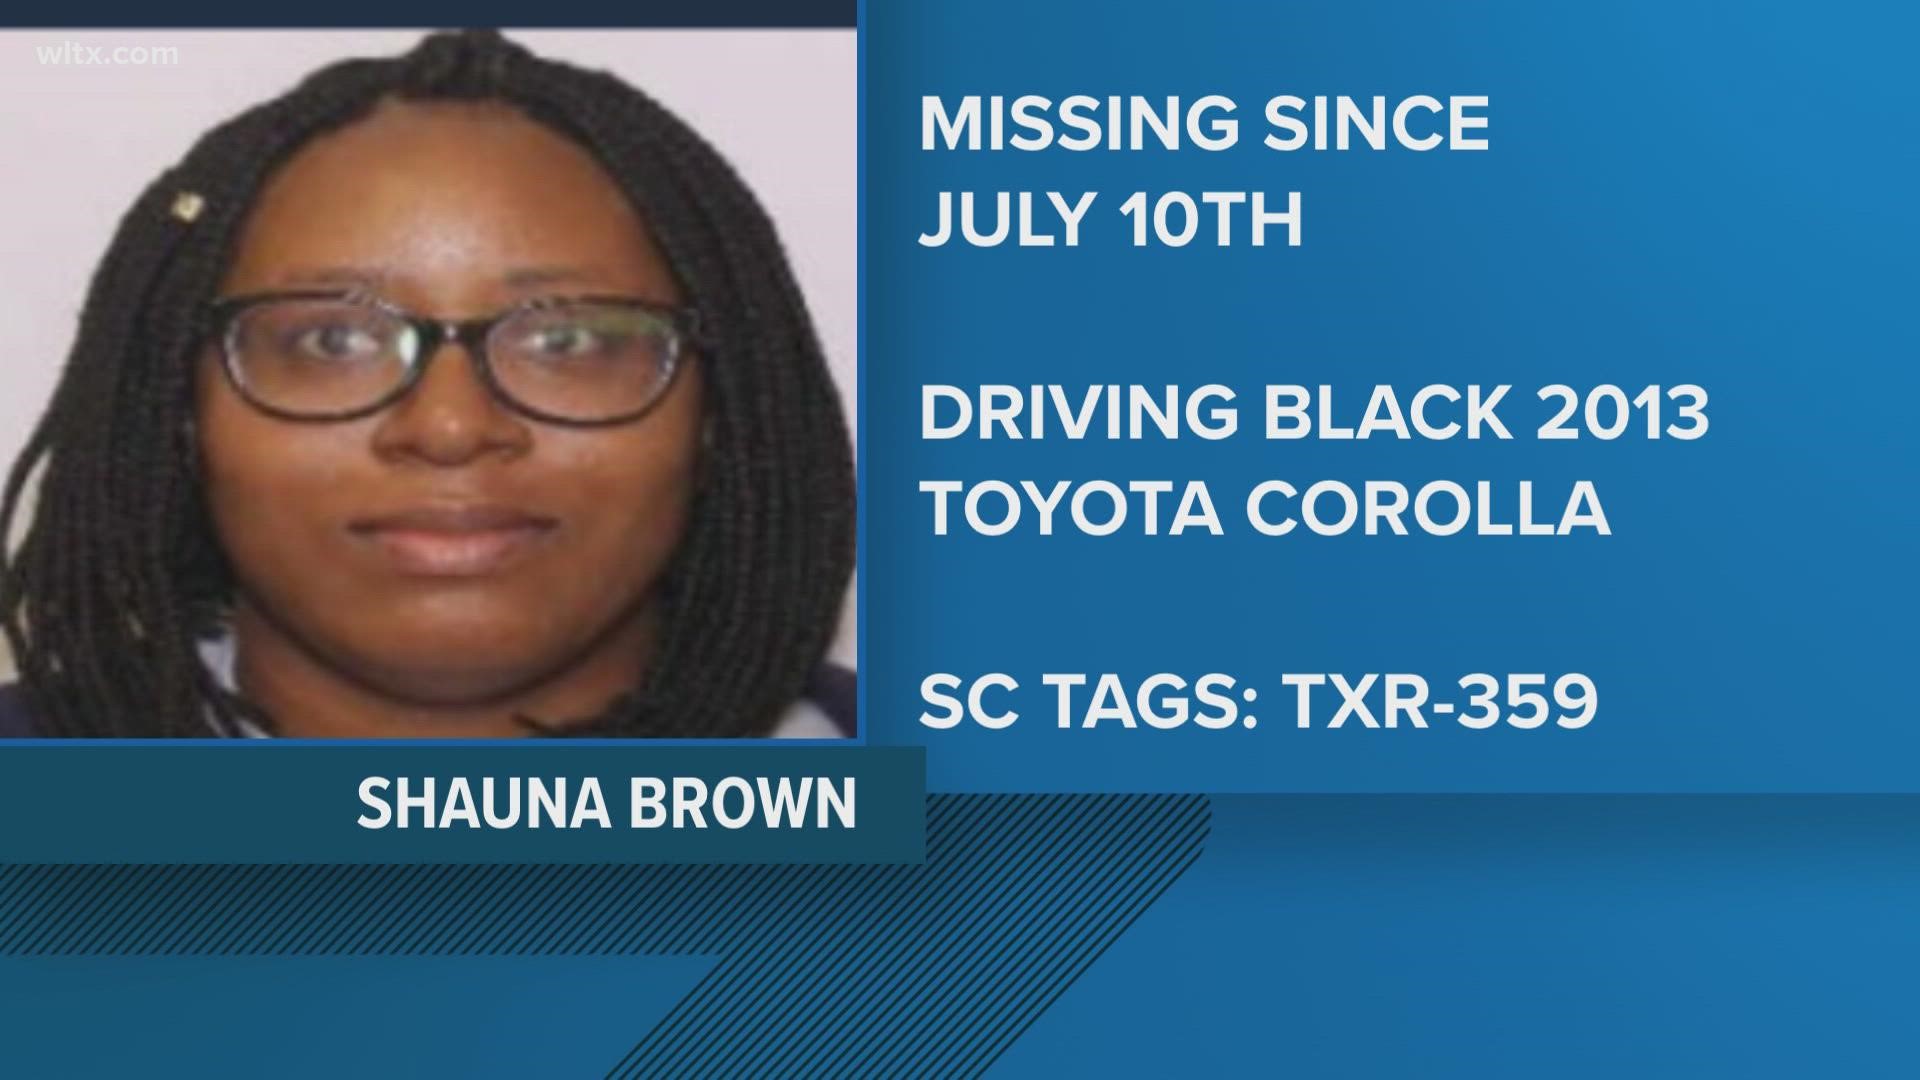 Officers say the mother of 39-year-old Shauna Brown says she hasn't seen her daughter since back on July 12.